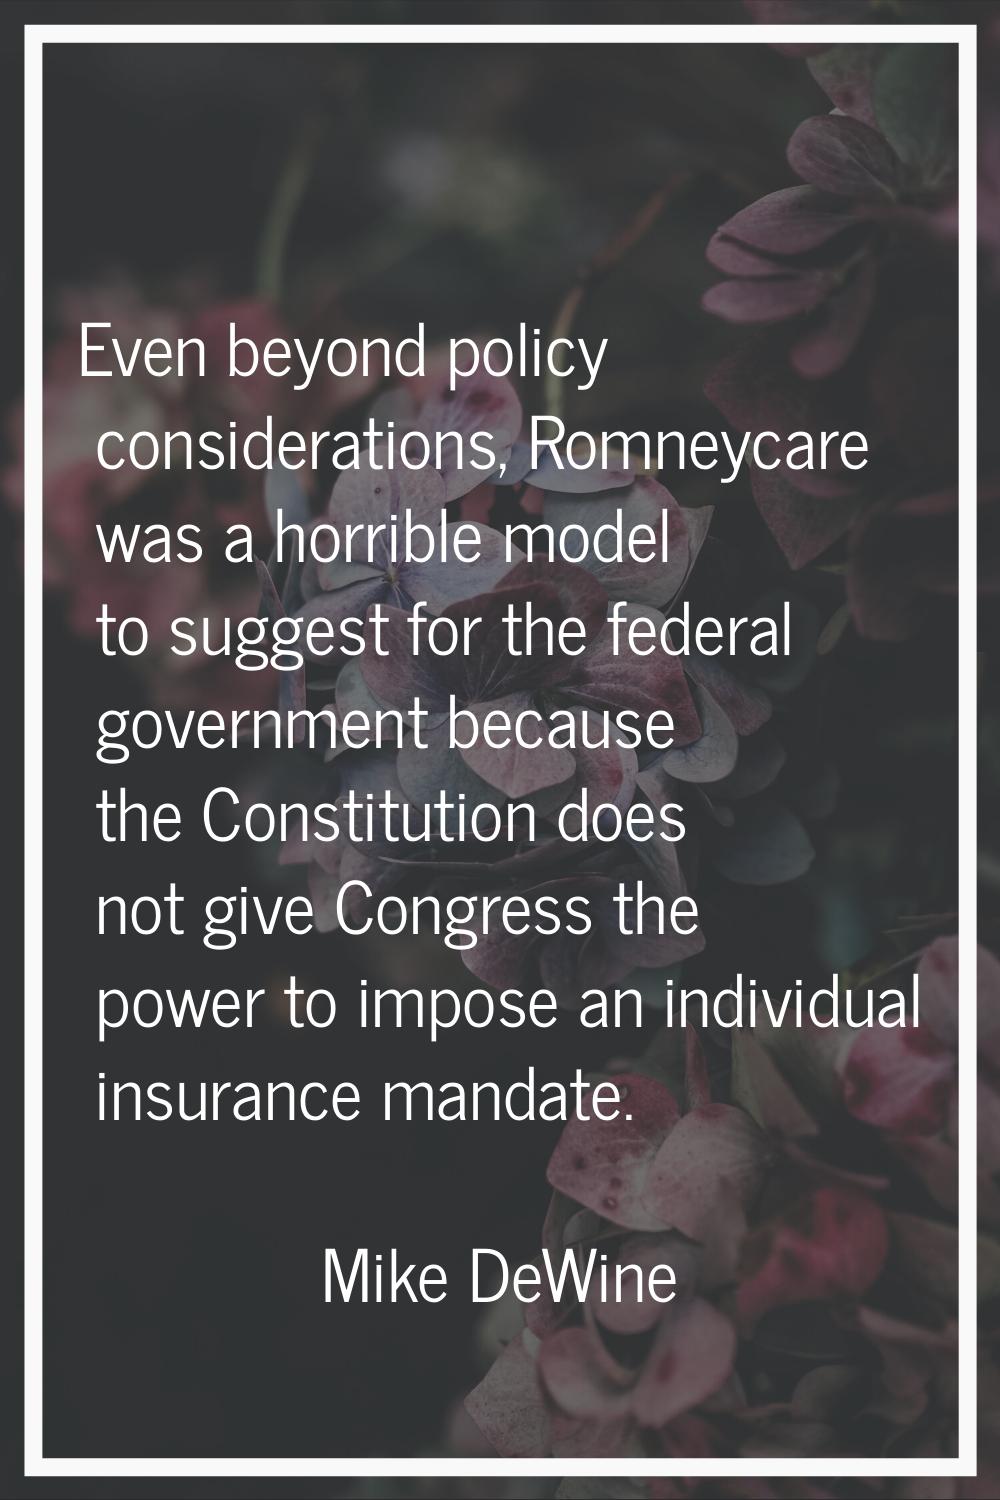 Even beyond policy considerations, Romneycare was a horrible model to suggest for the federal gover